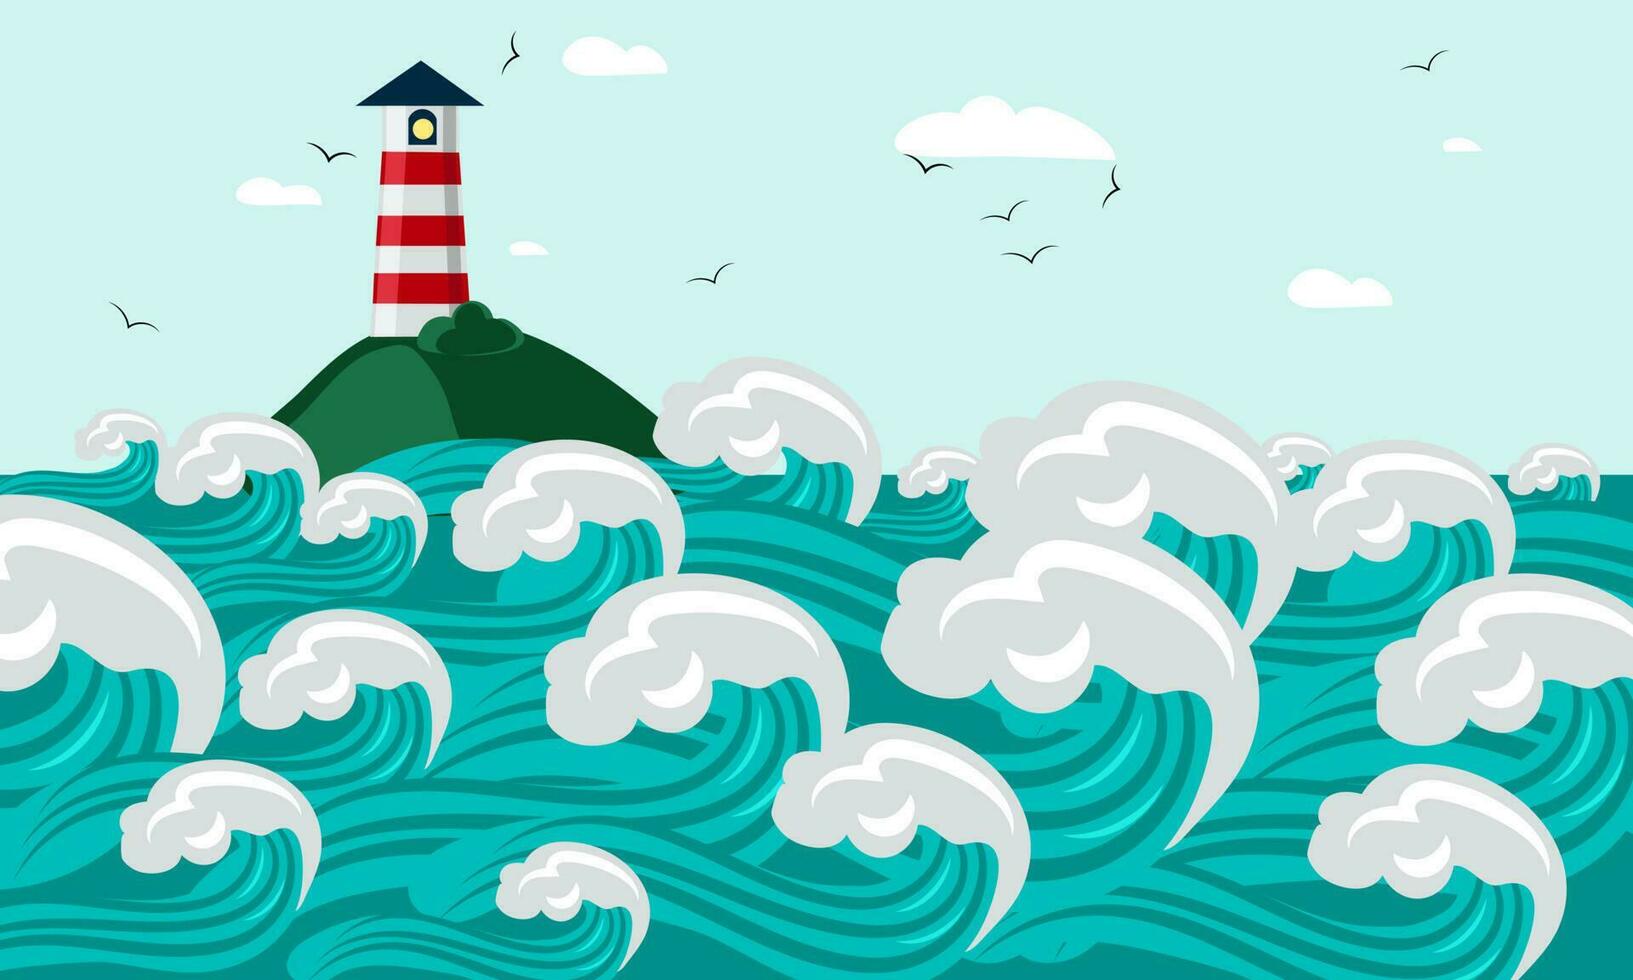 Lighthouse on the rocks of the islands around the sea rough waves cartoon vector background. Lighthouse in the ocean for navigation illustration. Children's illustration for printing as a postcard